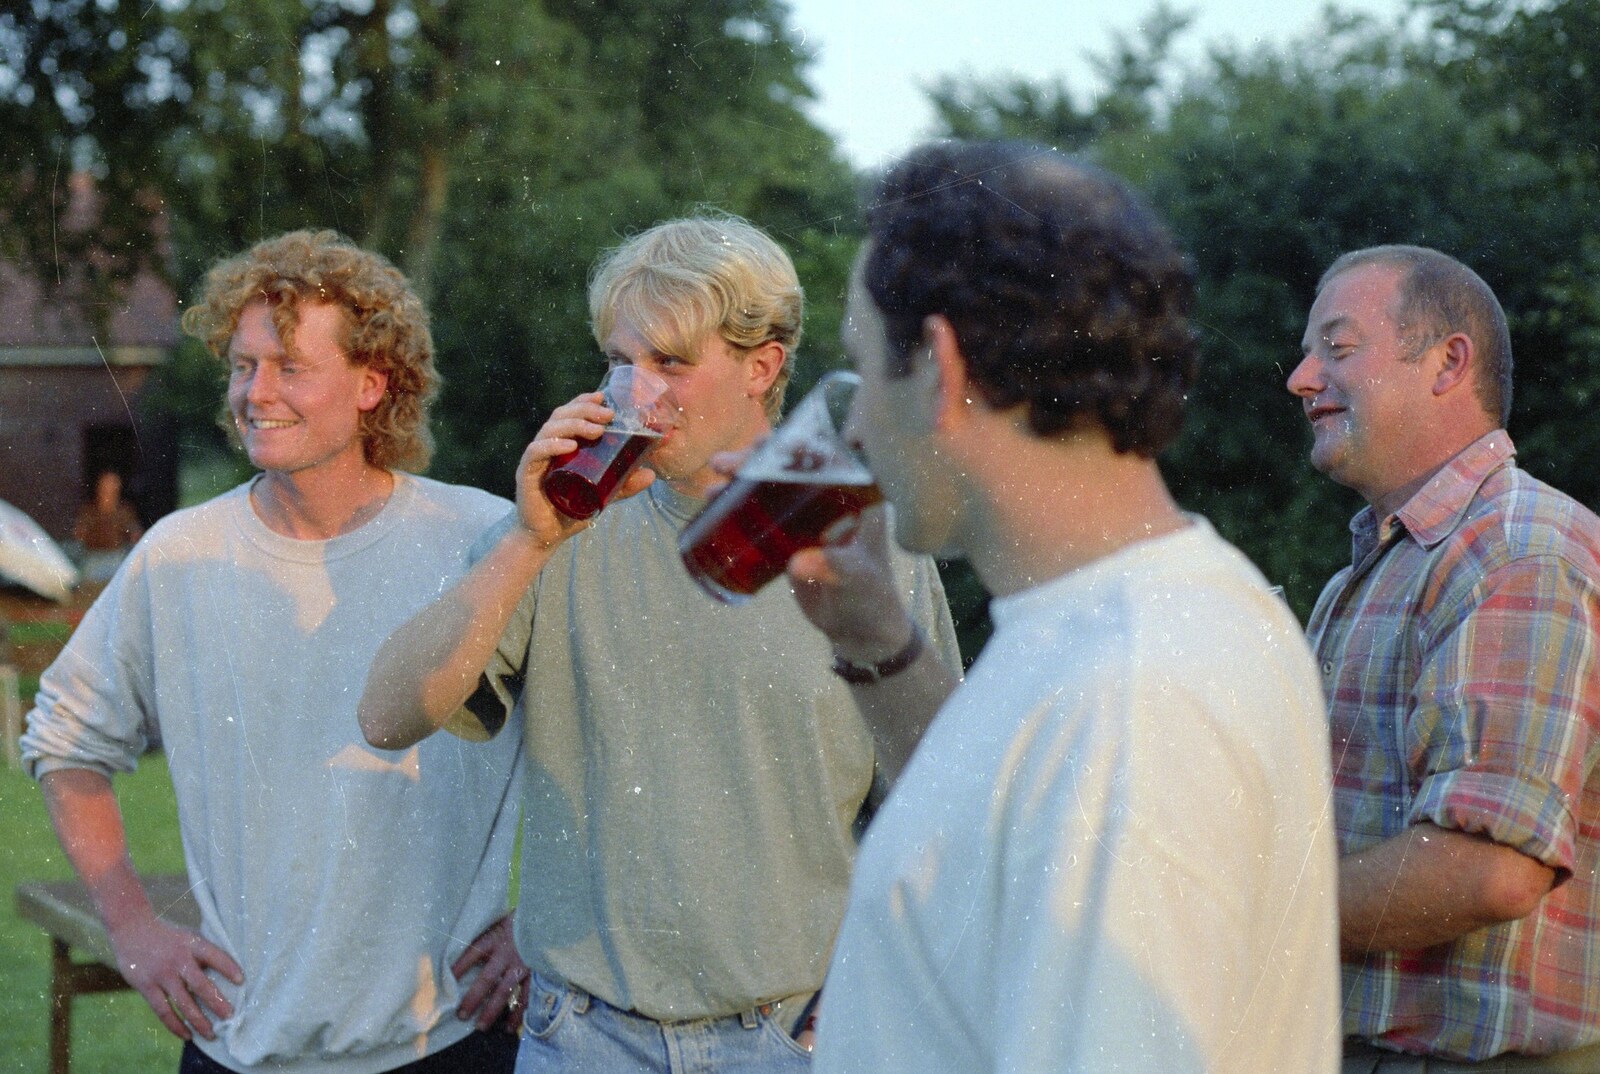 The boys drink ale from DH's Barbeque at The Swan Inn, Brome, Suffolk - July 14th 1996